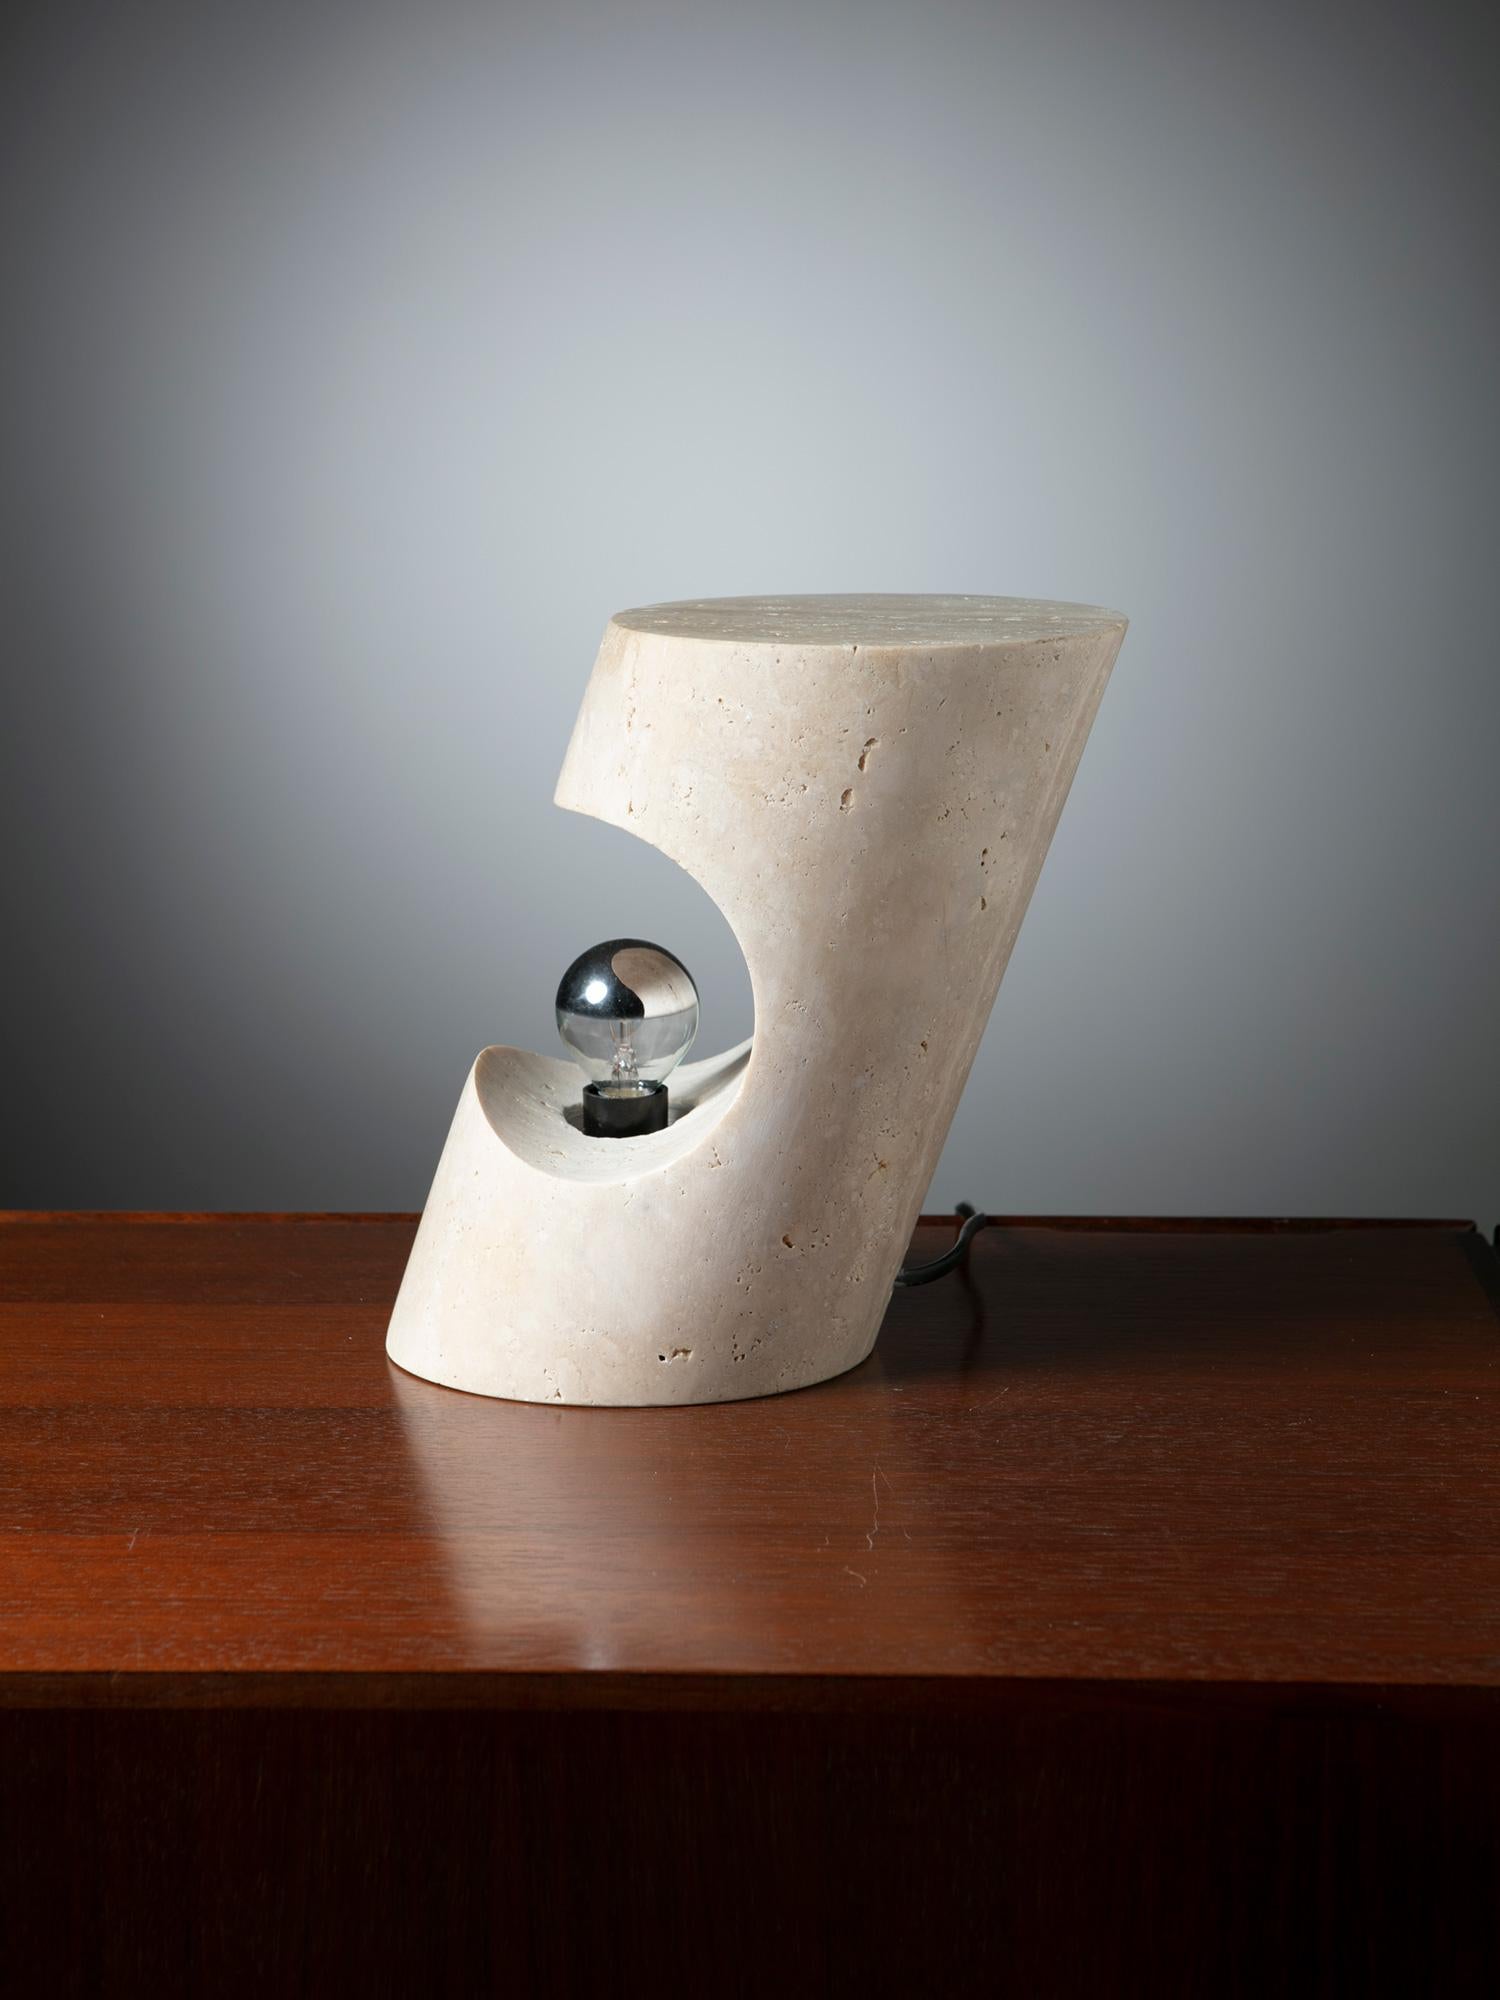 Sculptural lamp by Giuliano Cesari for Nucleo - Sormani.
Solid travertine block. Other pieces available from the same stone family (see picture 5).